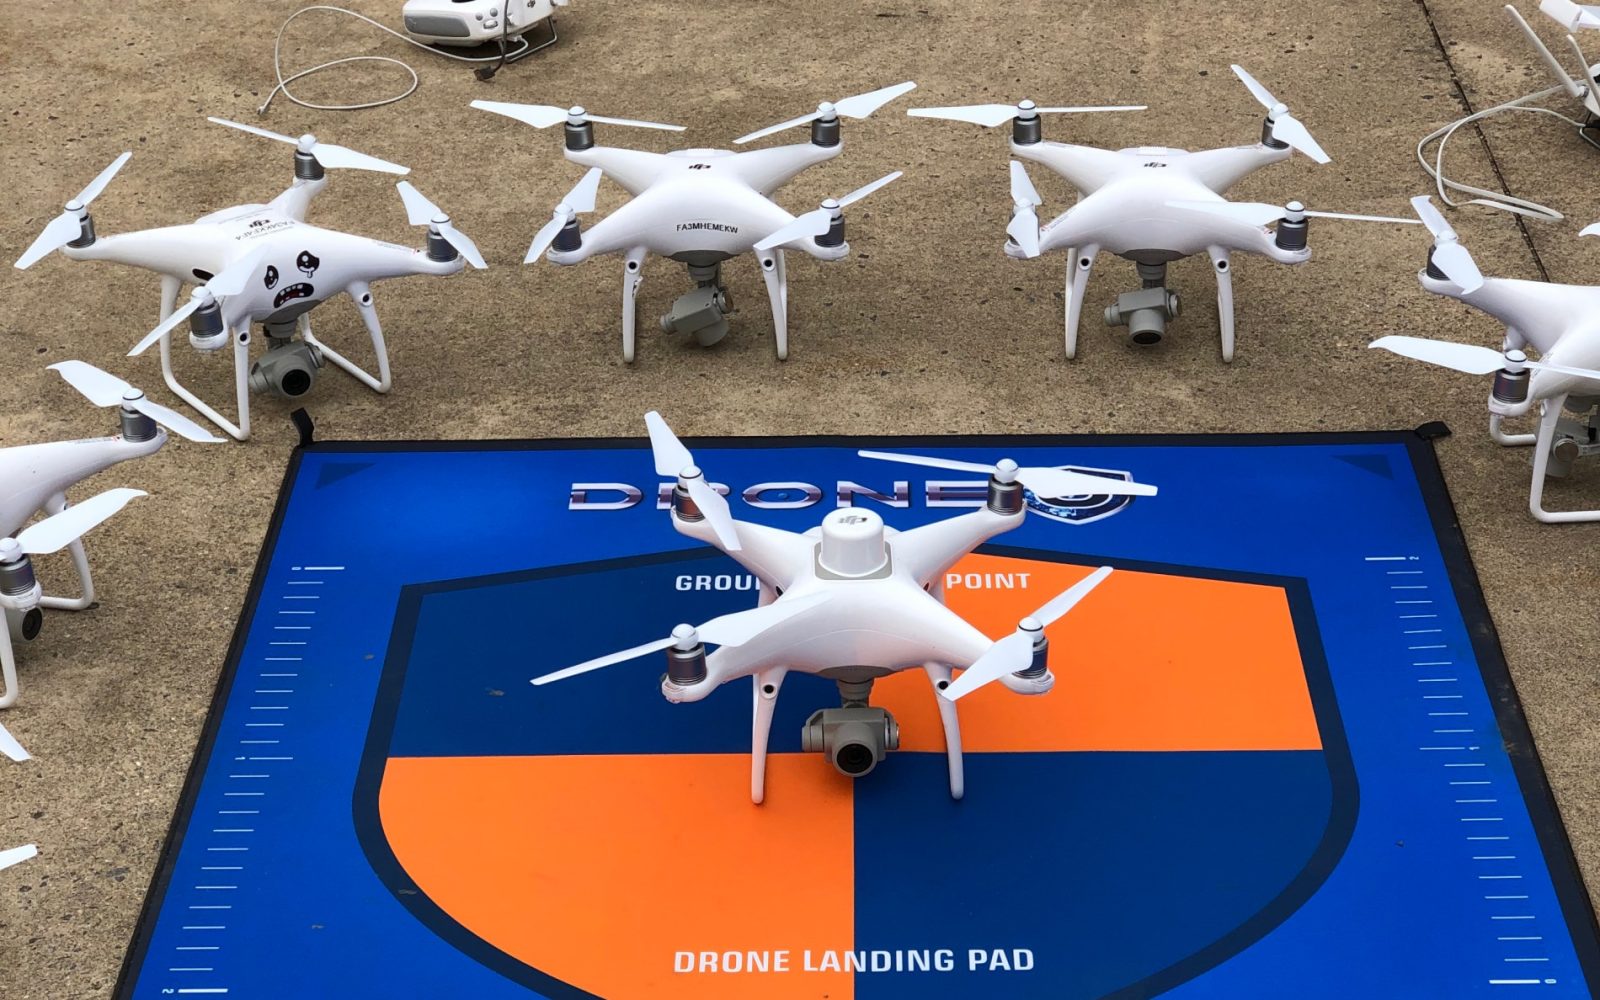 Drone mapping expert weighs in on DJI Phantom 4 RTK firmware update